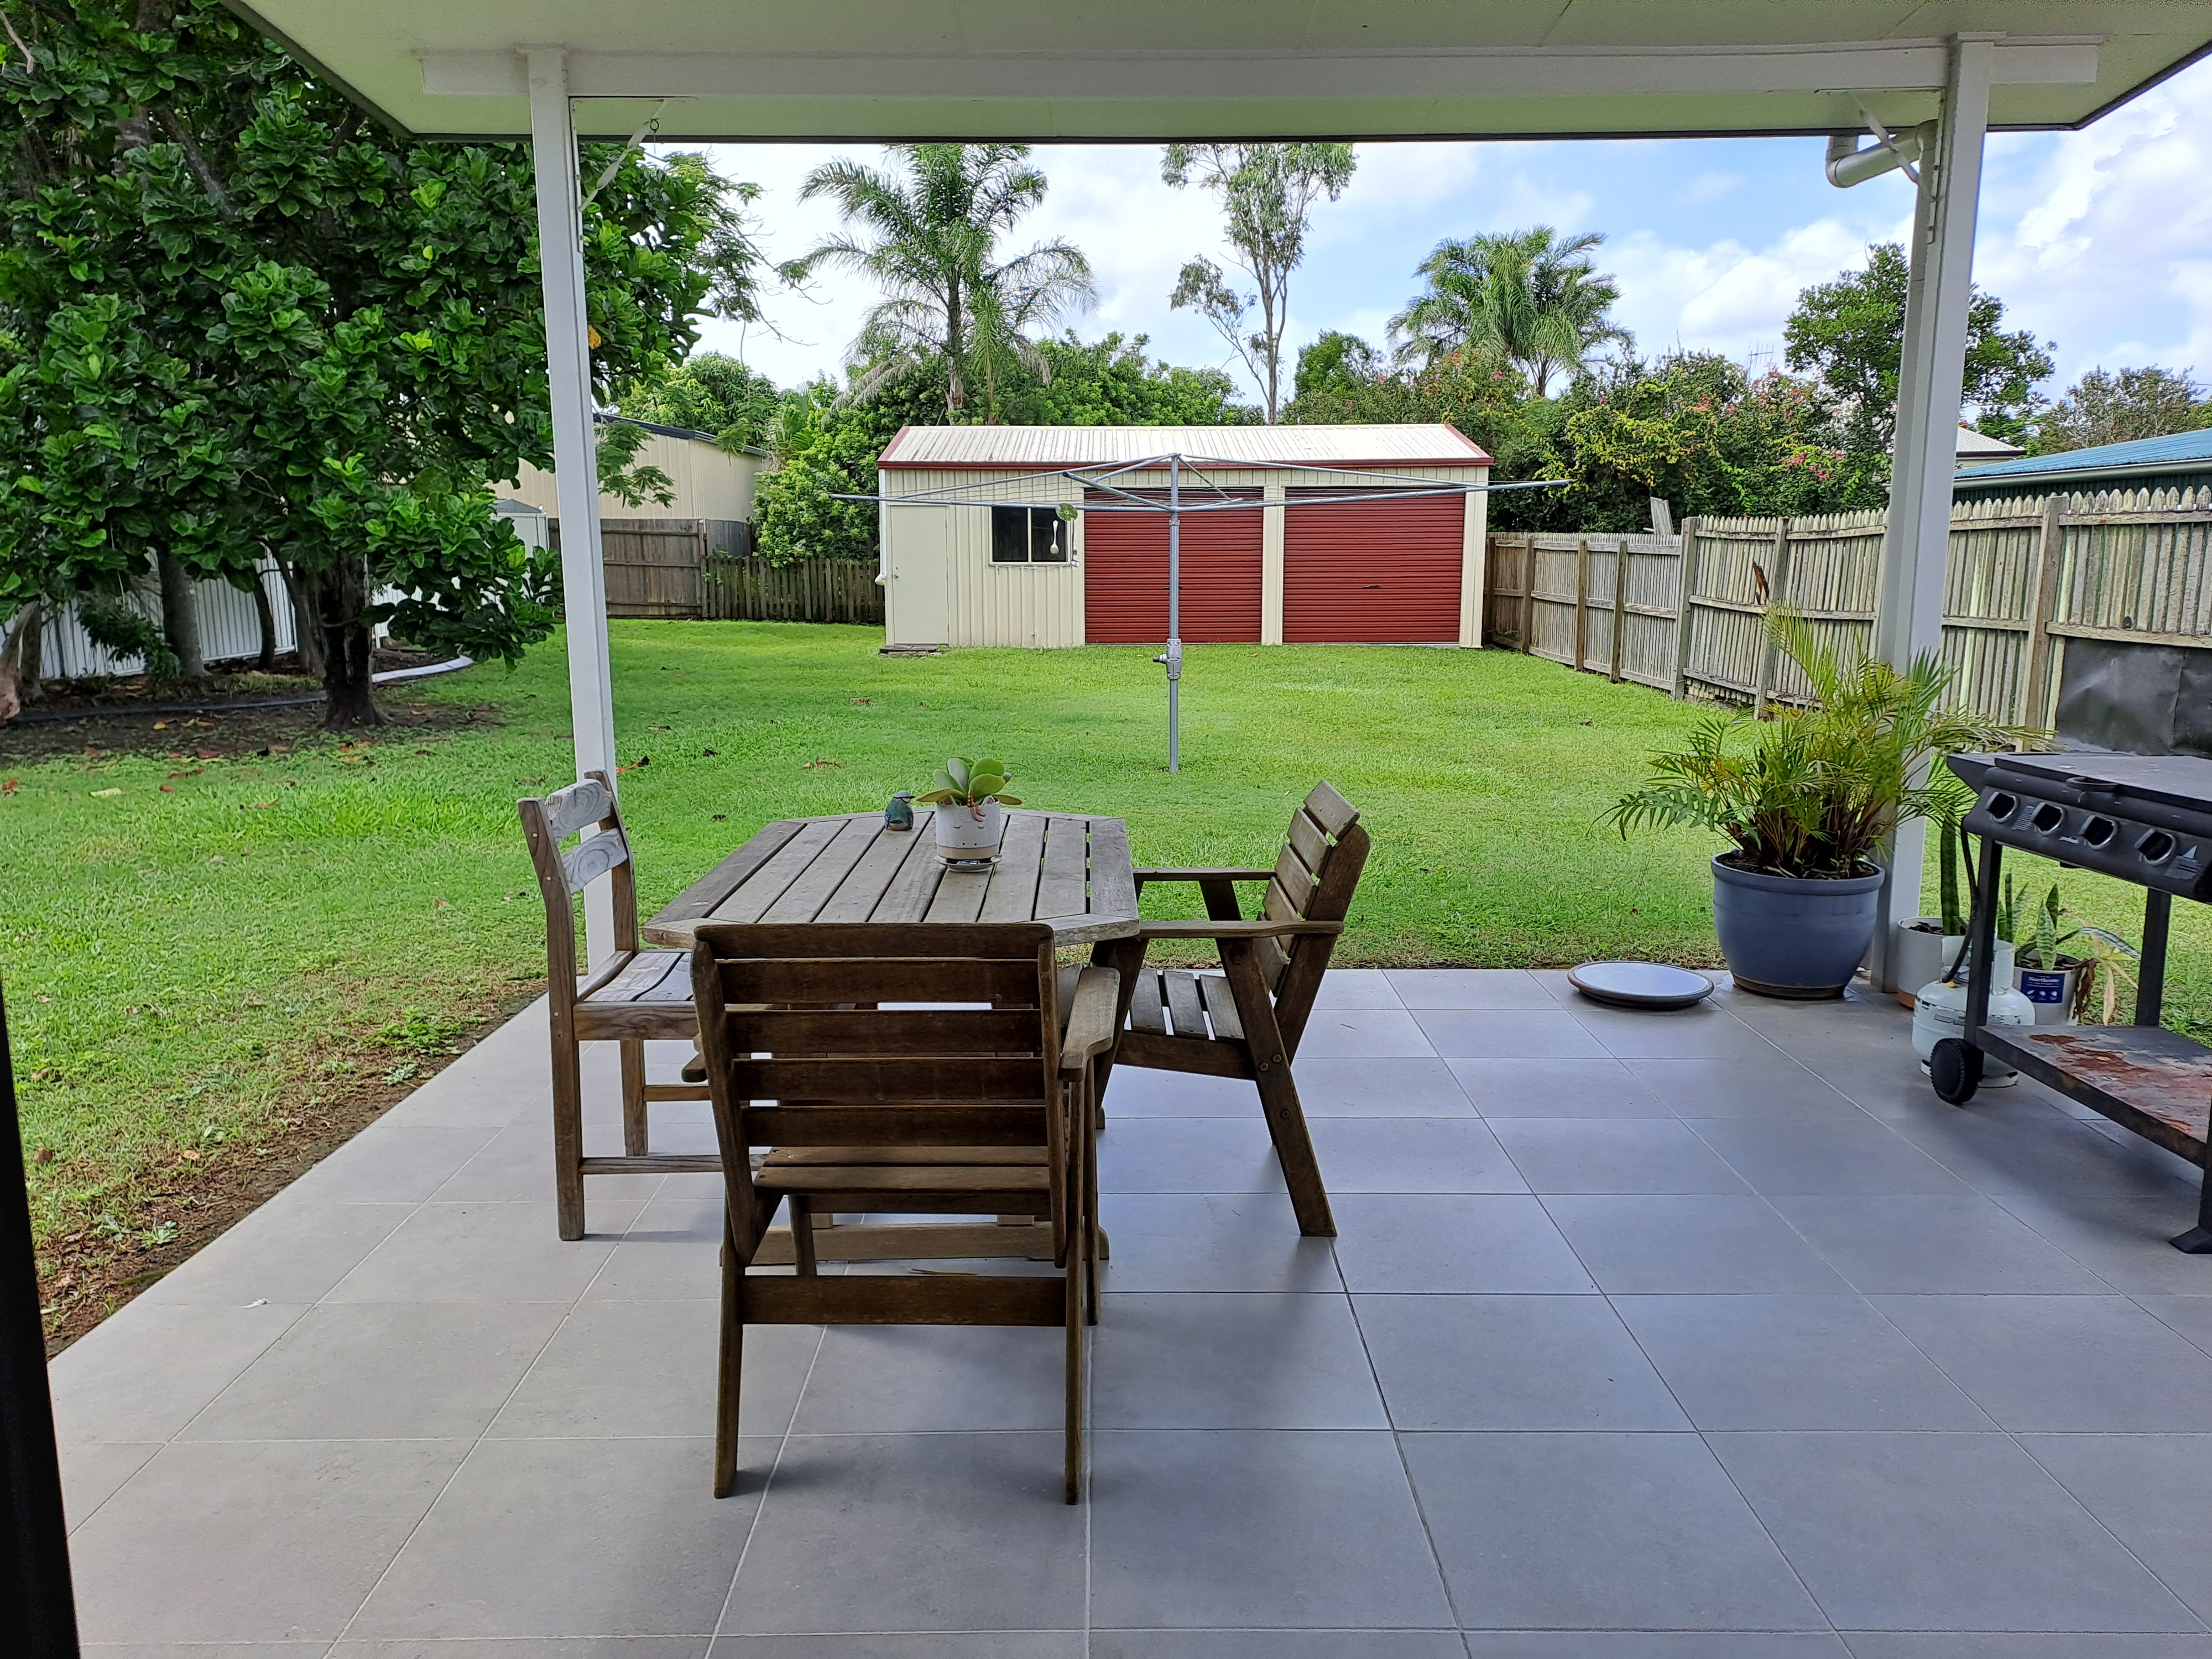 An outdoor dining area with a yard and a shed behind